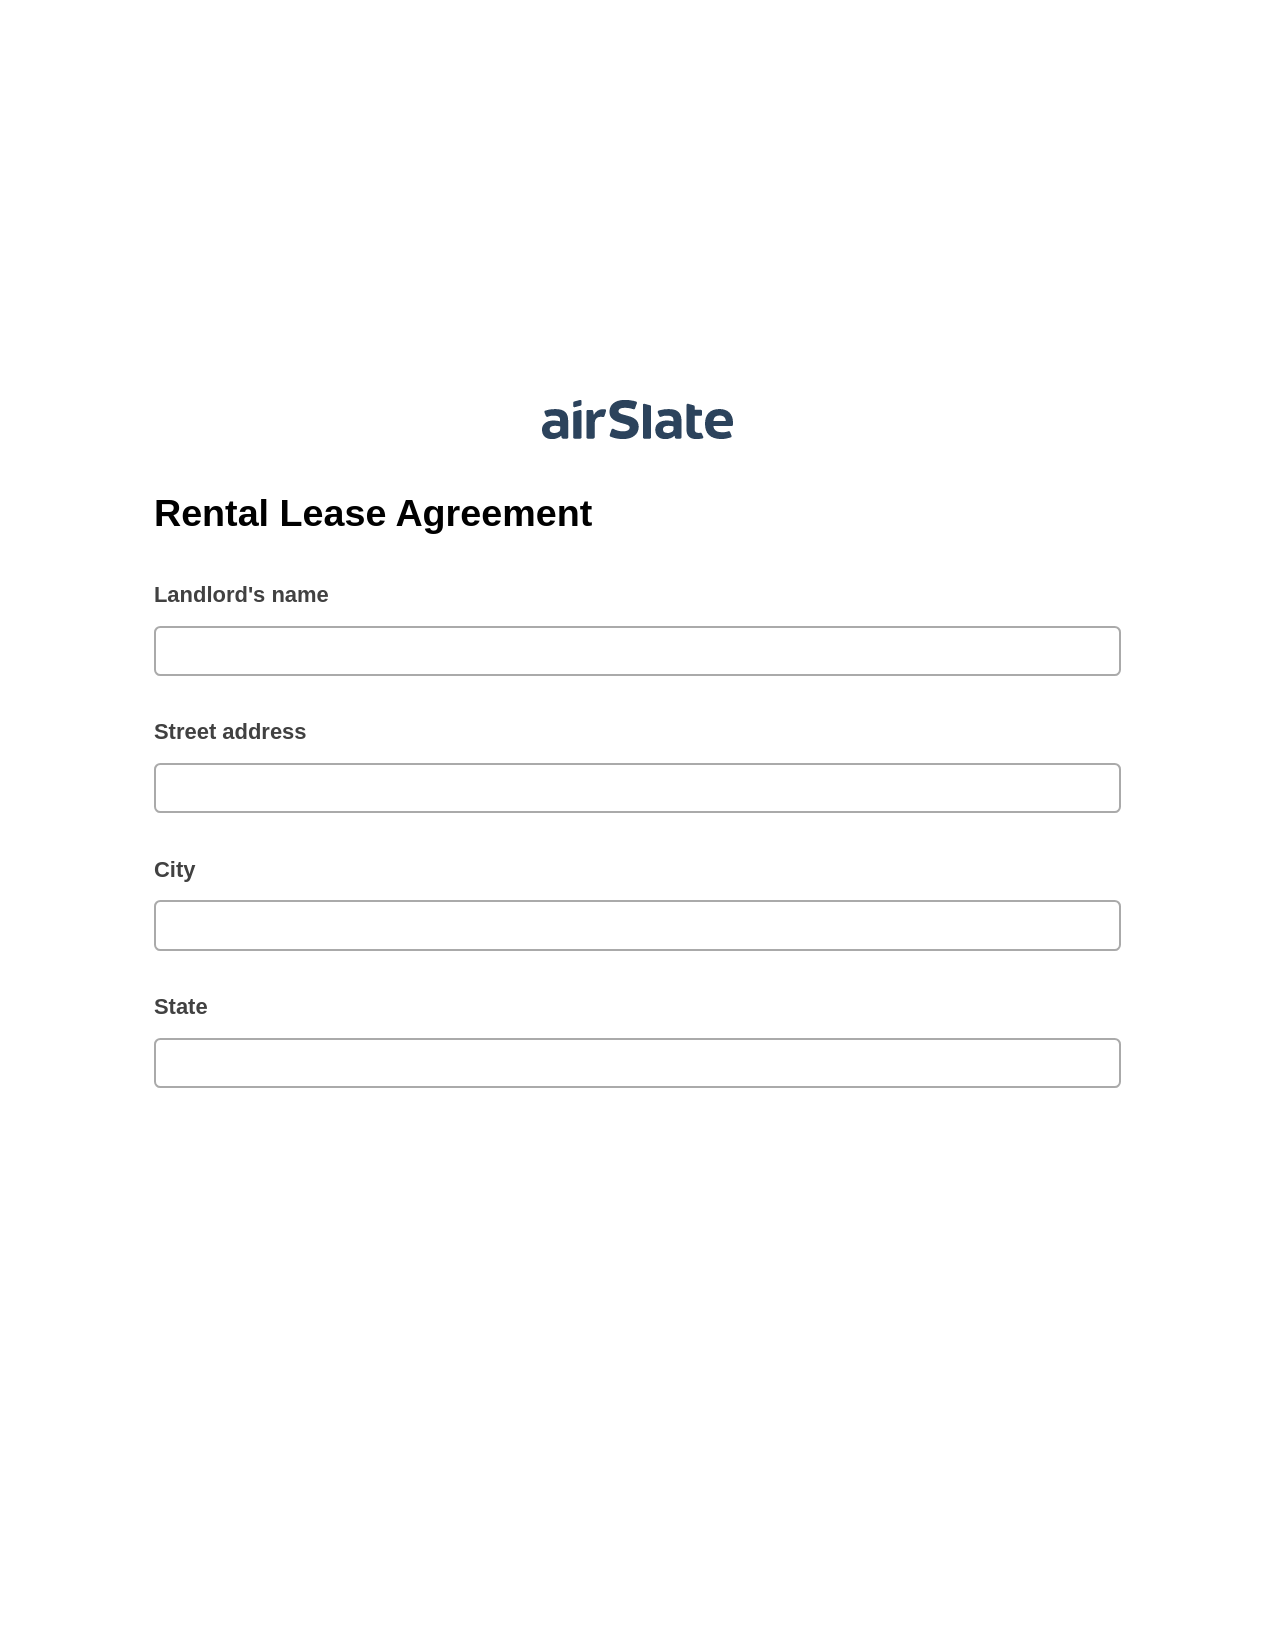 Rental Lease Agreement Pre-fill from Google Sheets Bot, Google Cloud Print Bot, Post-finish Document Bot